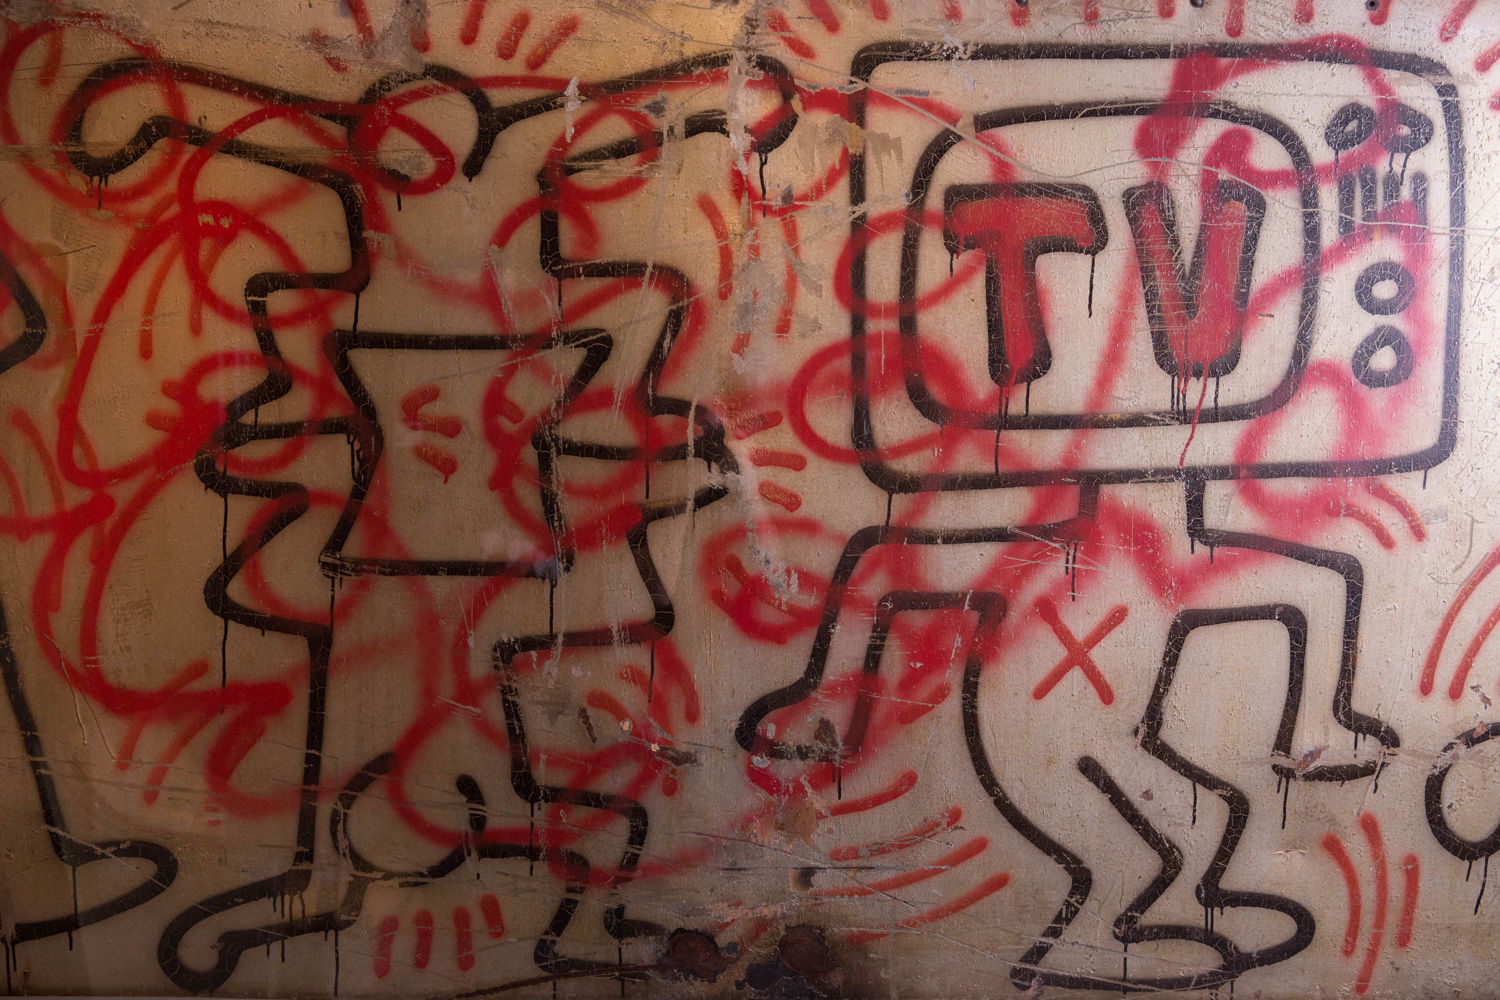 "Untitled" by Keith Haring 